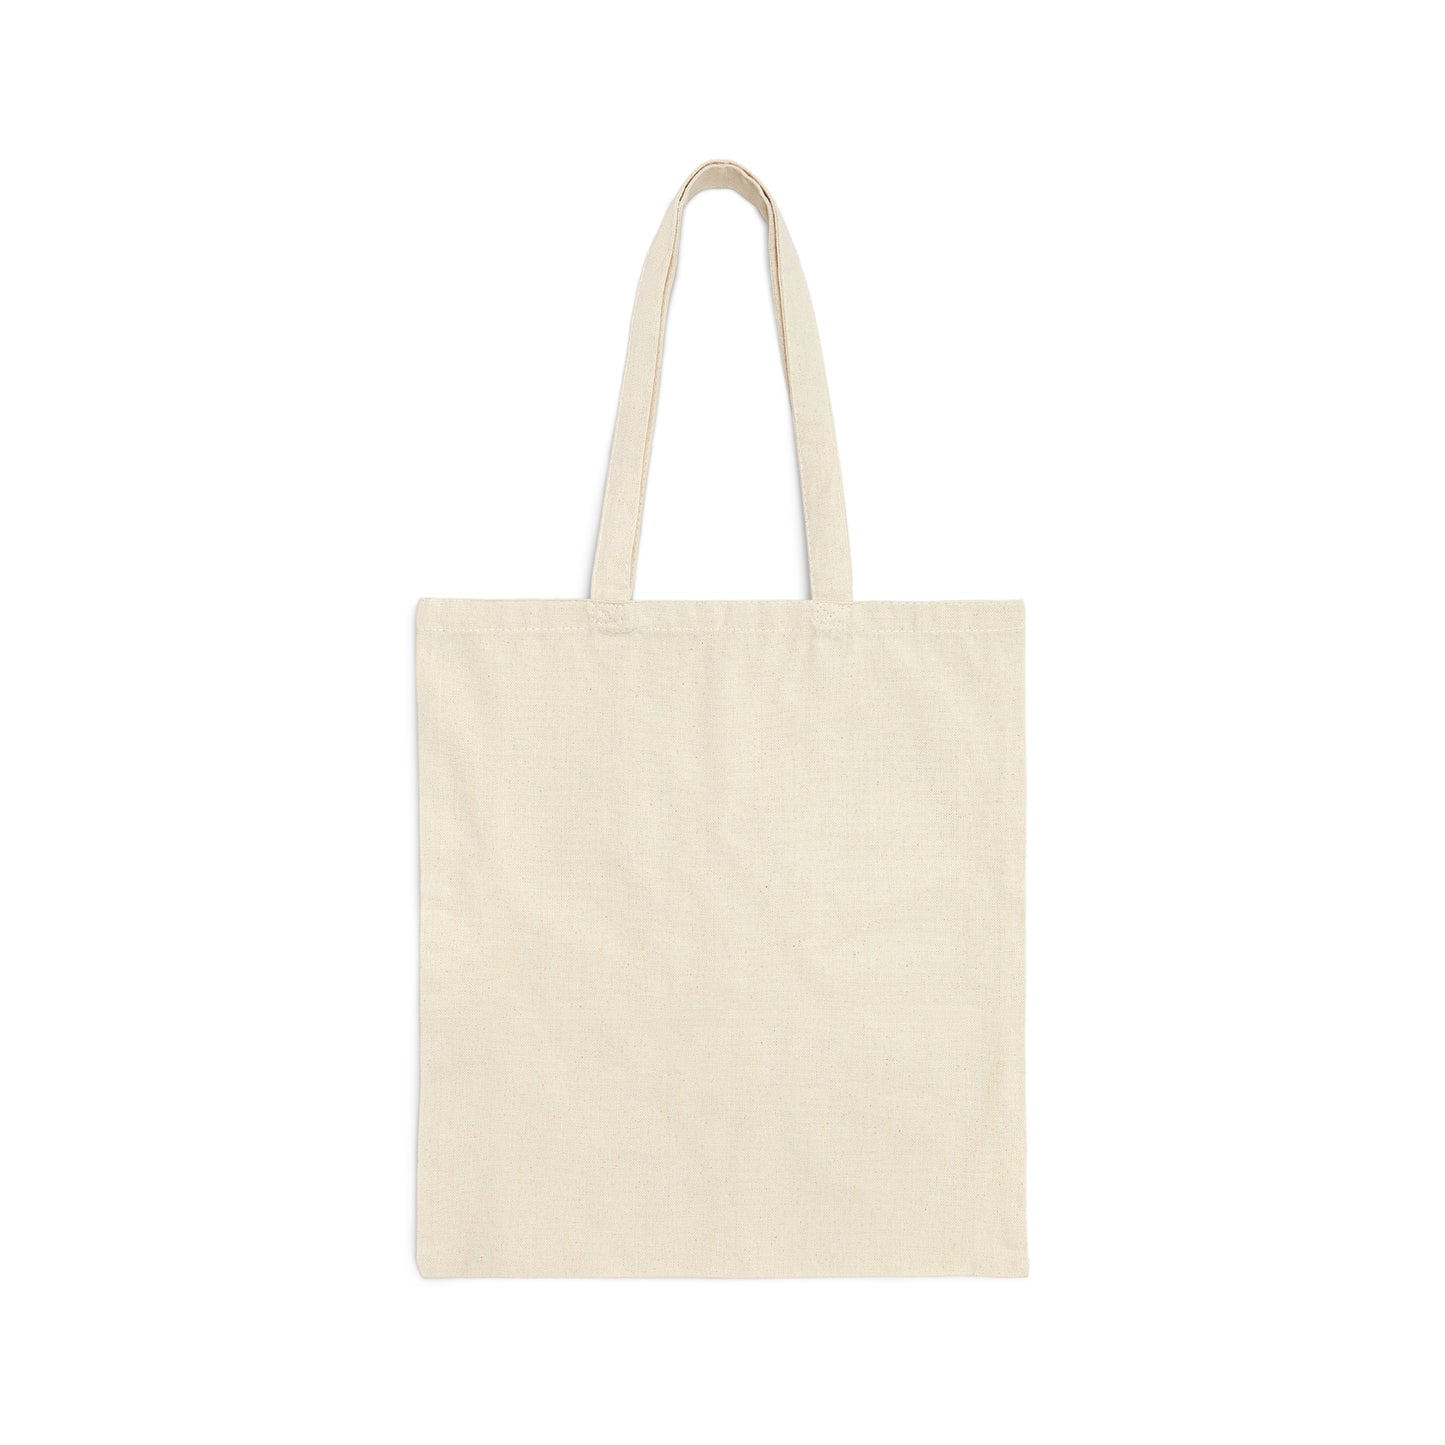 Written By Colleen Hoover Black Cotton Tote Bag